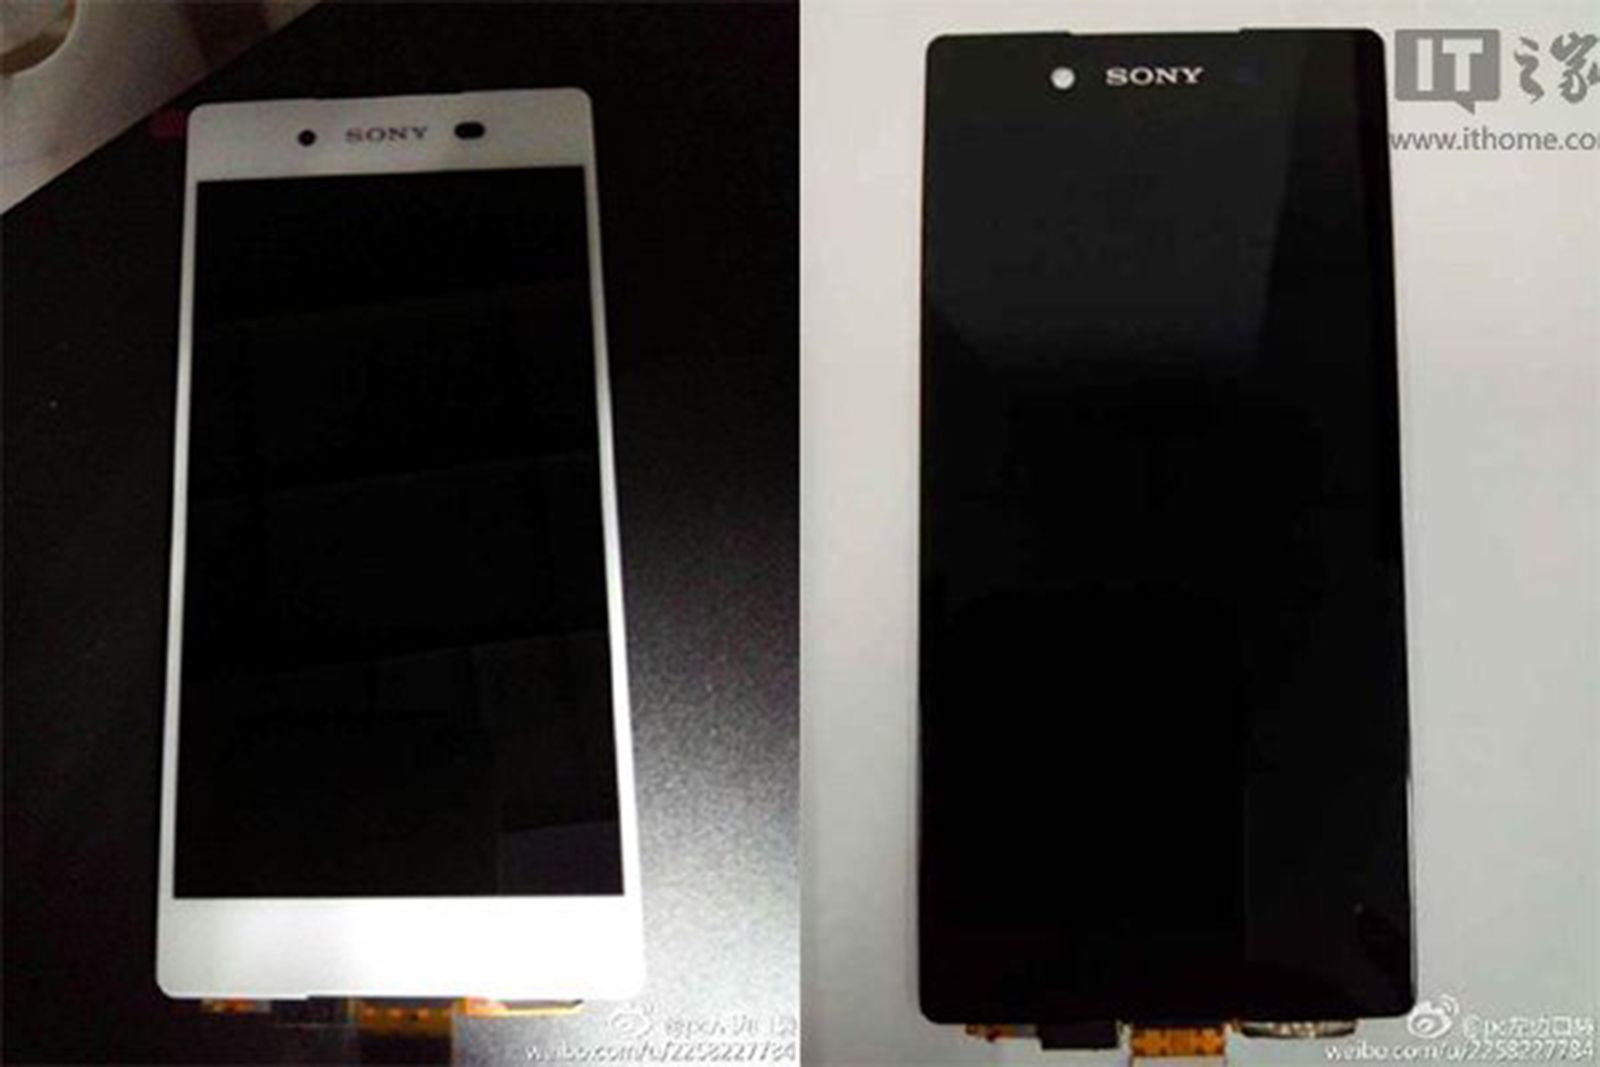 sony xperia z4 cover leaks with super thin bezel and selfie camera change image 1